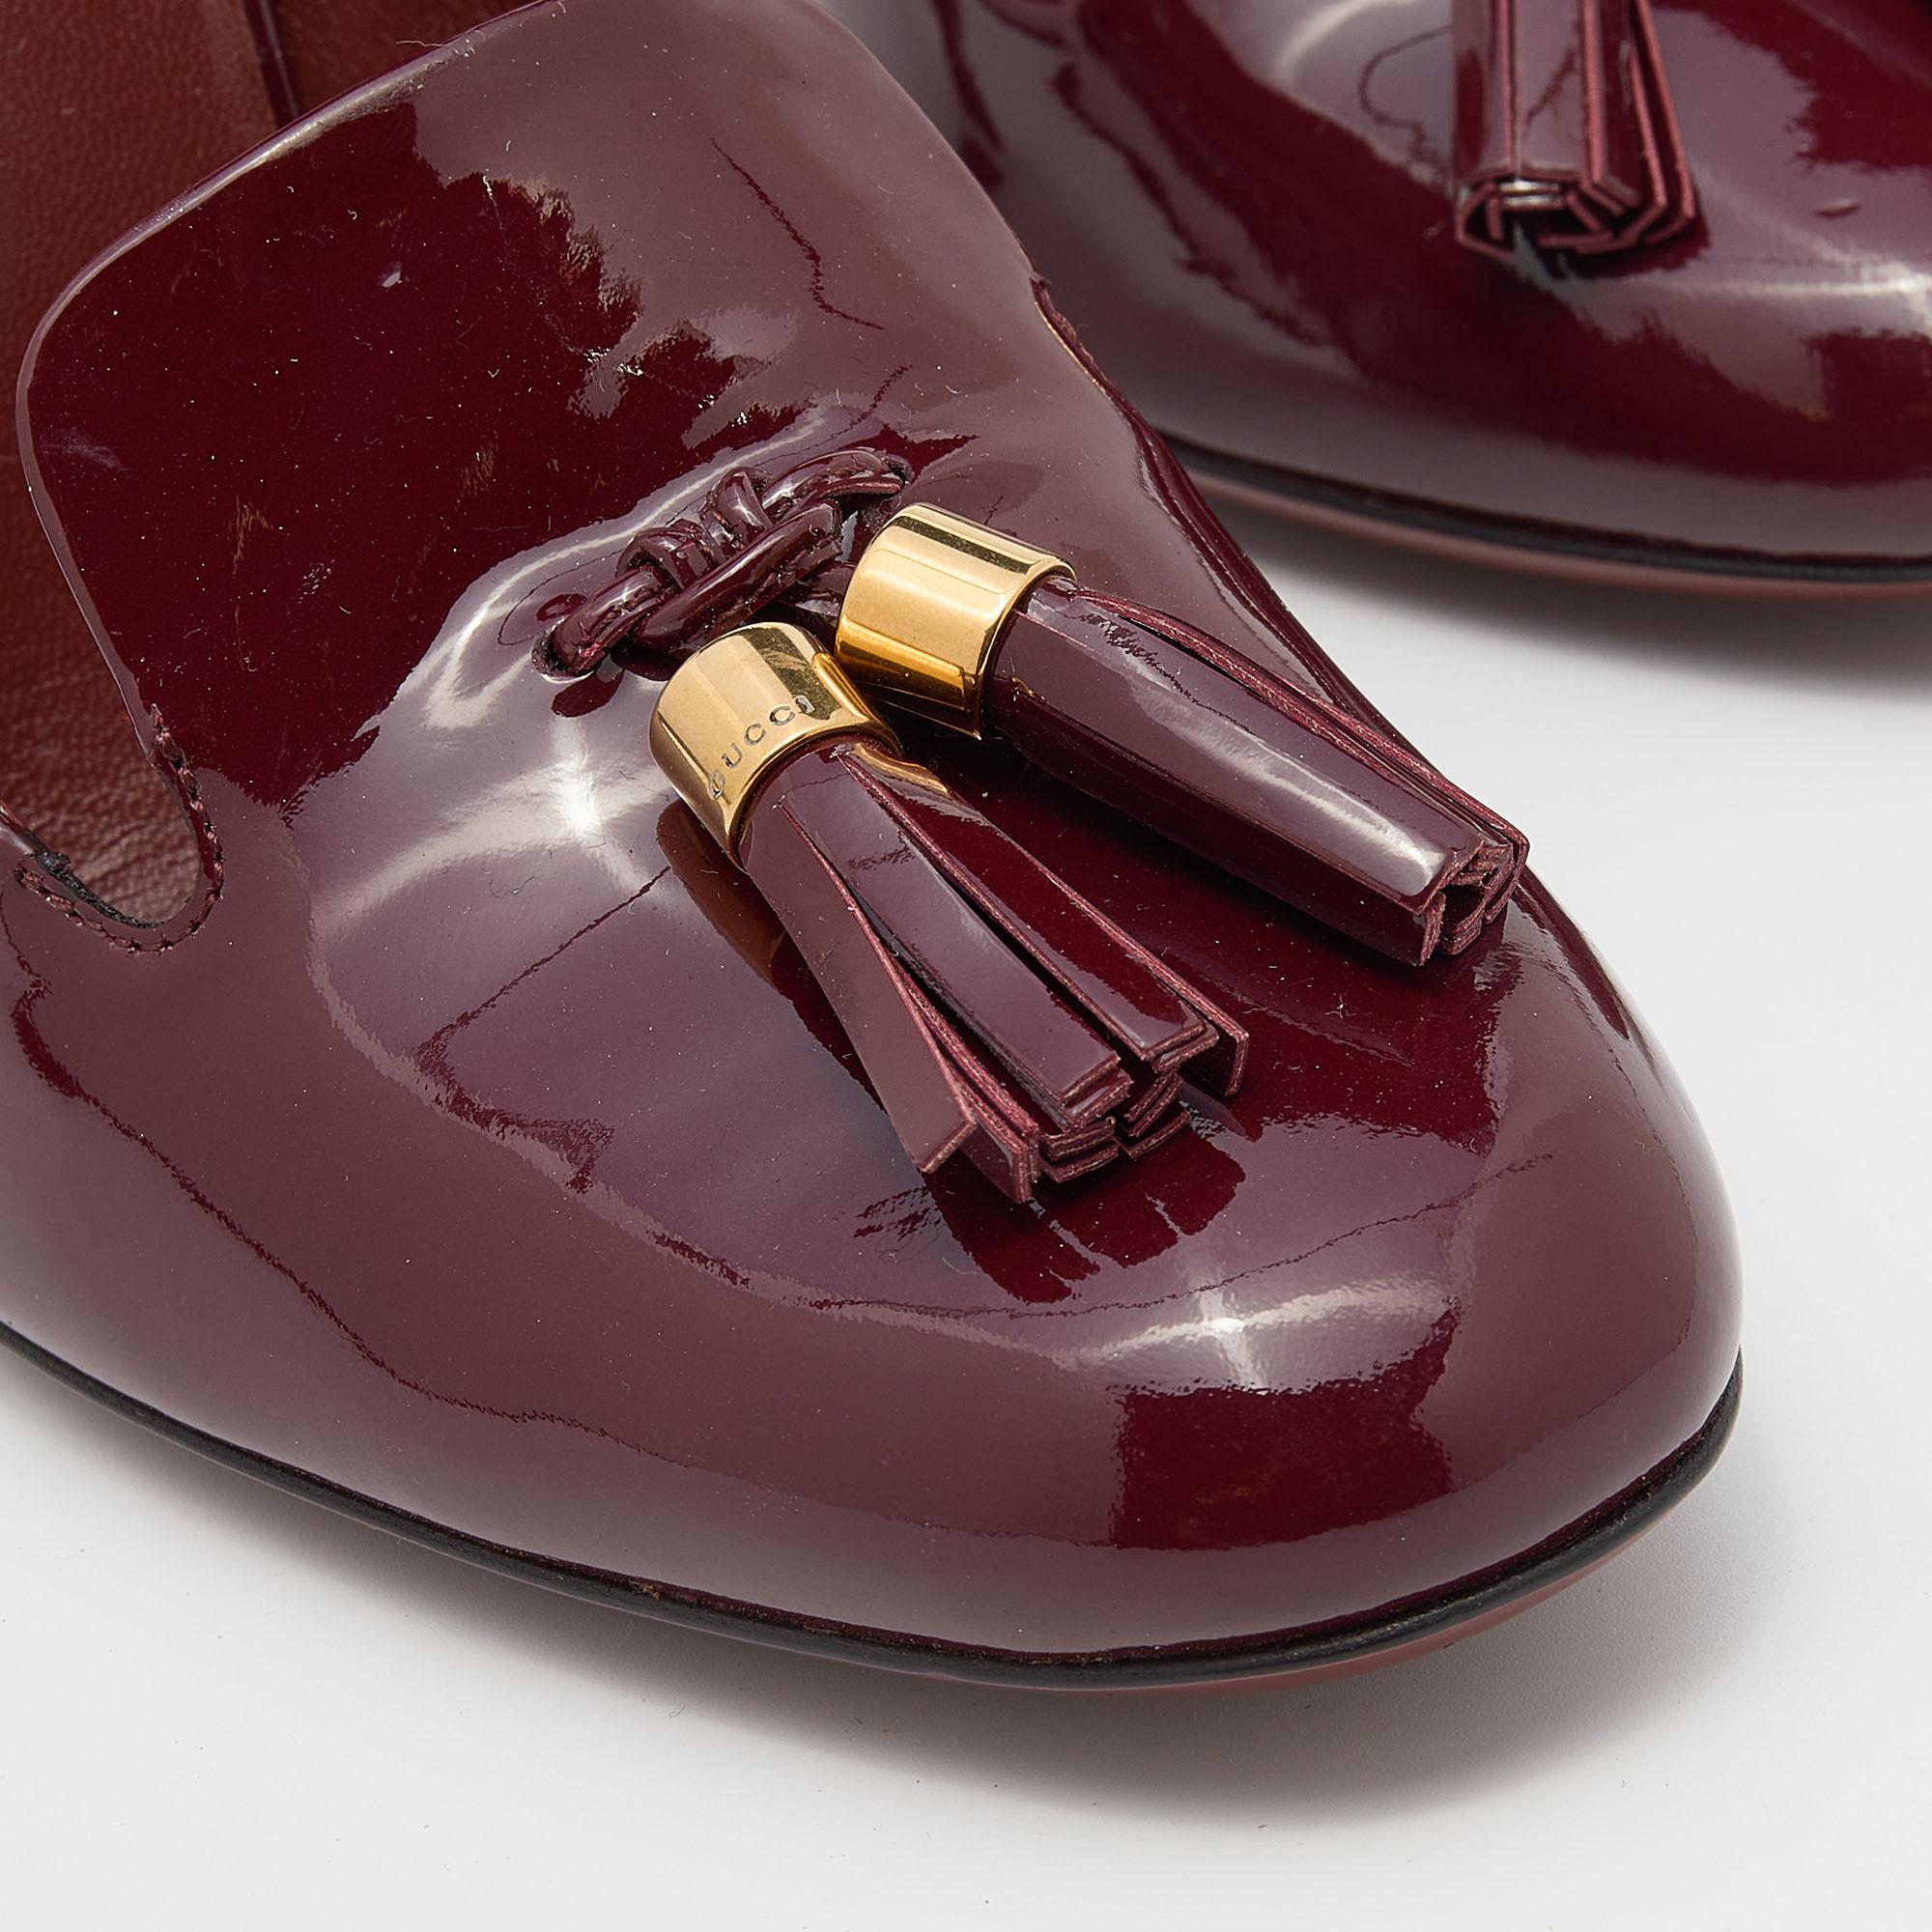 Women's Gucci Burgundy Patent Leather Tassel Loafer Pumps Size 38.5